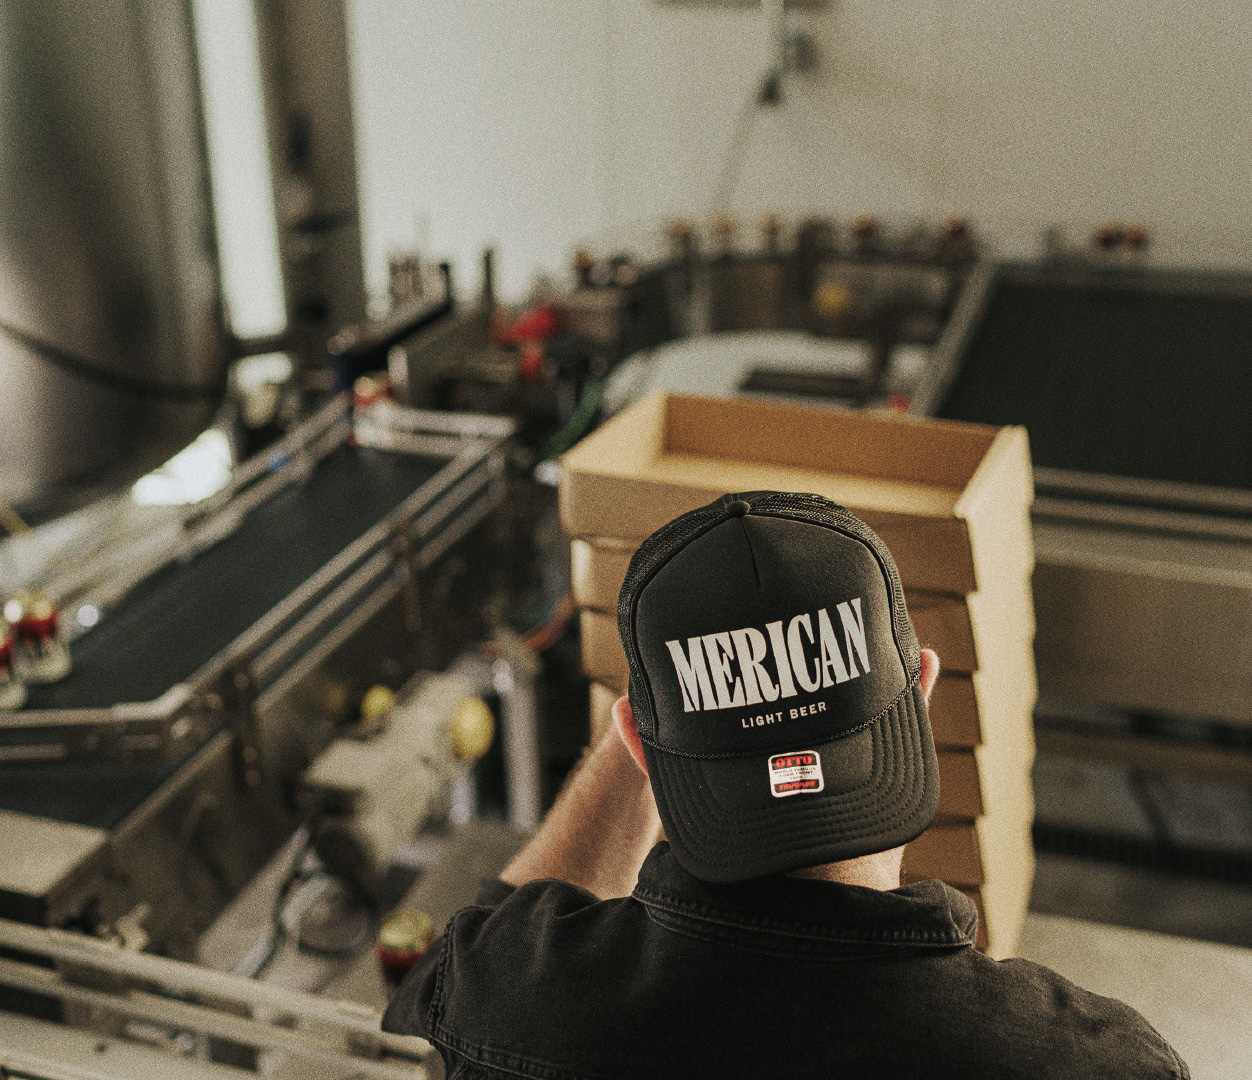 Merican staff member packing cans into cardboard boxes, wearing a backwards black trucker cap with the Merican logo printed on the front.